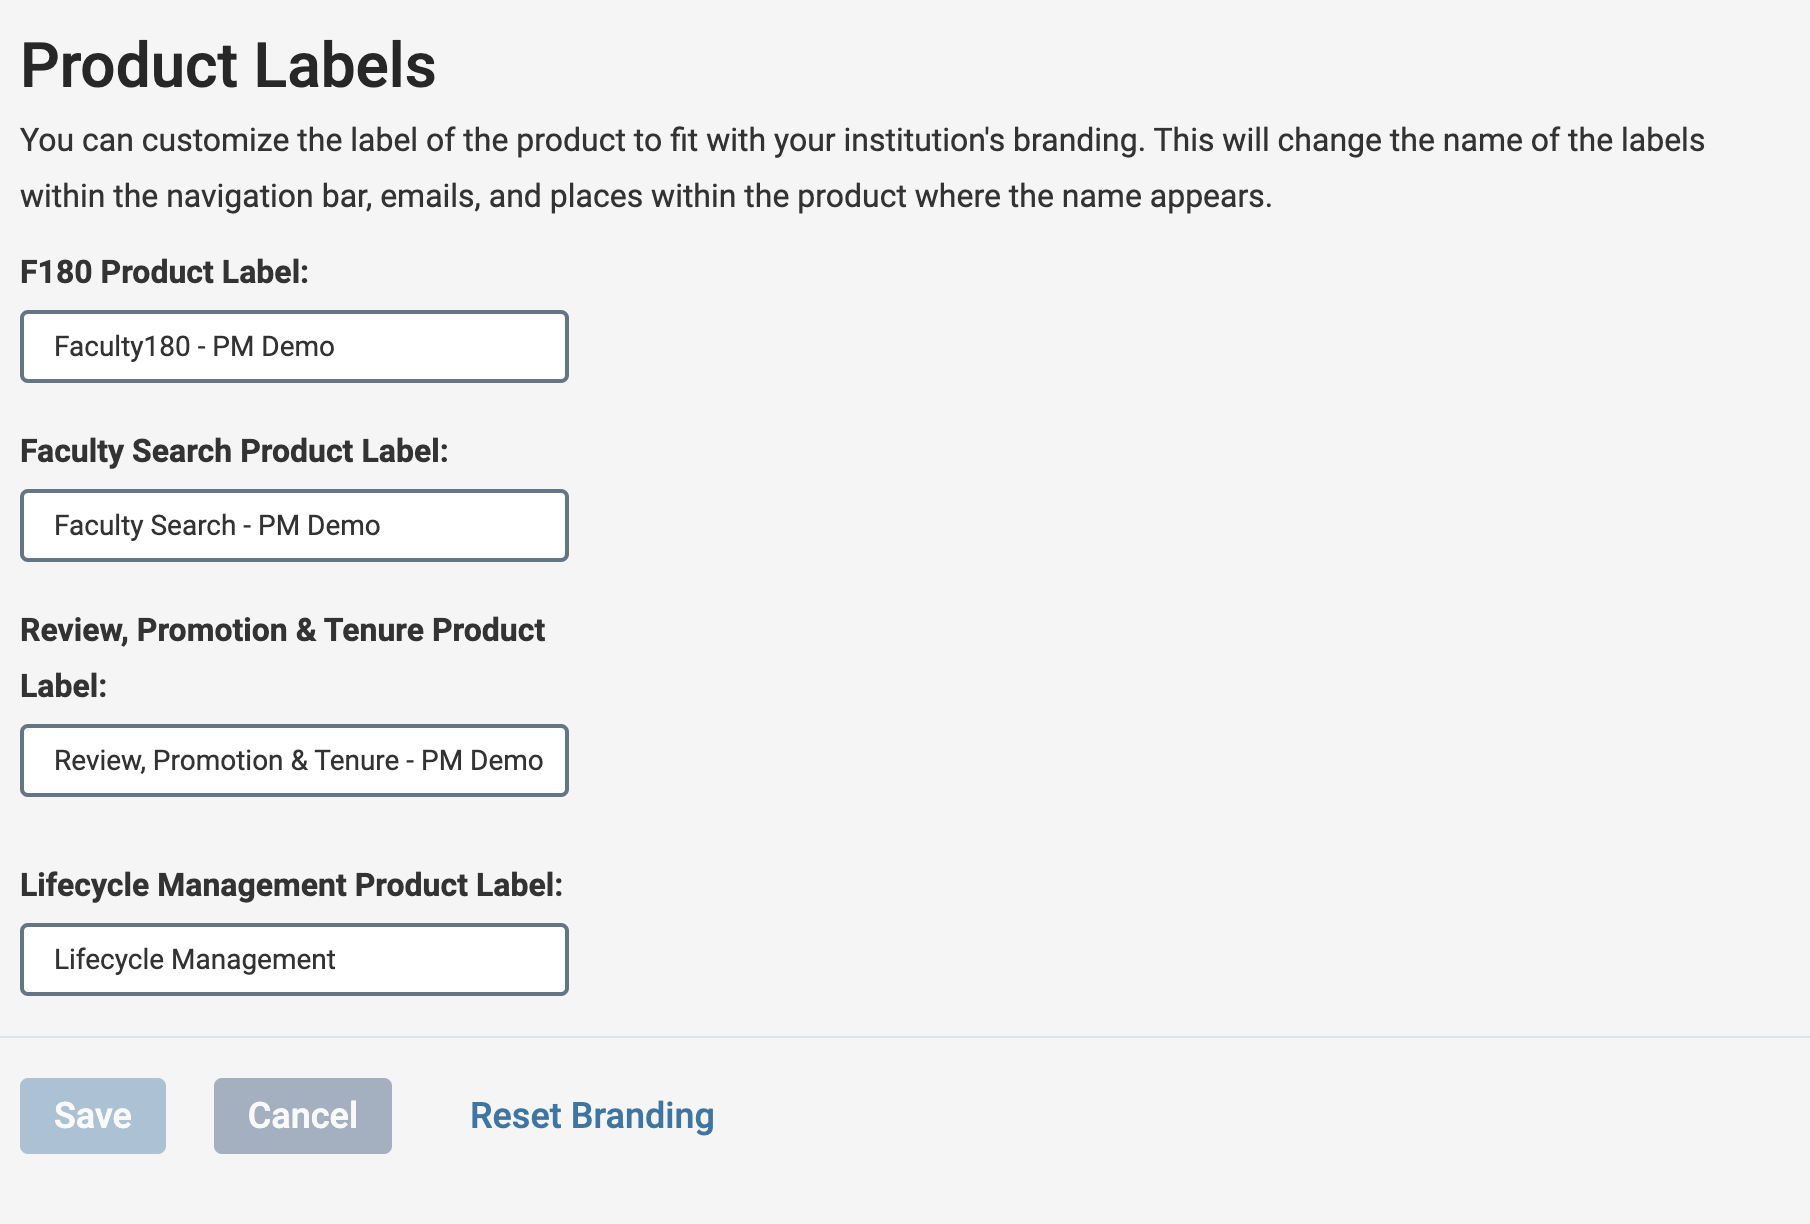 Product Labels section with F180 Product Label field space, Faculty Search Product Label field space, Review, Promotion & Tenure Product Label space, and Lifecycle Management Product Label space with Save, Cancel, and Reset Branding buttons below